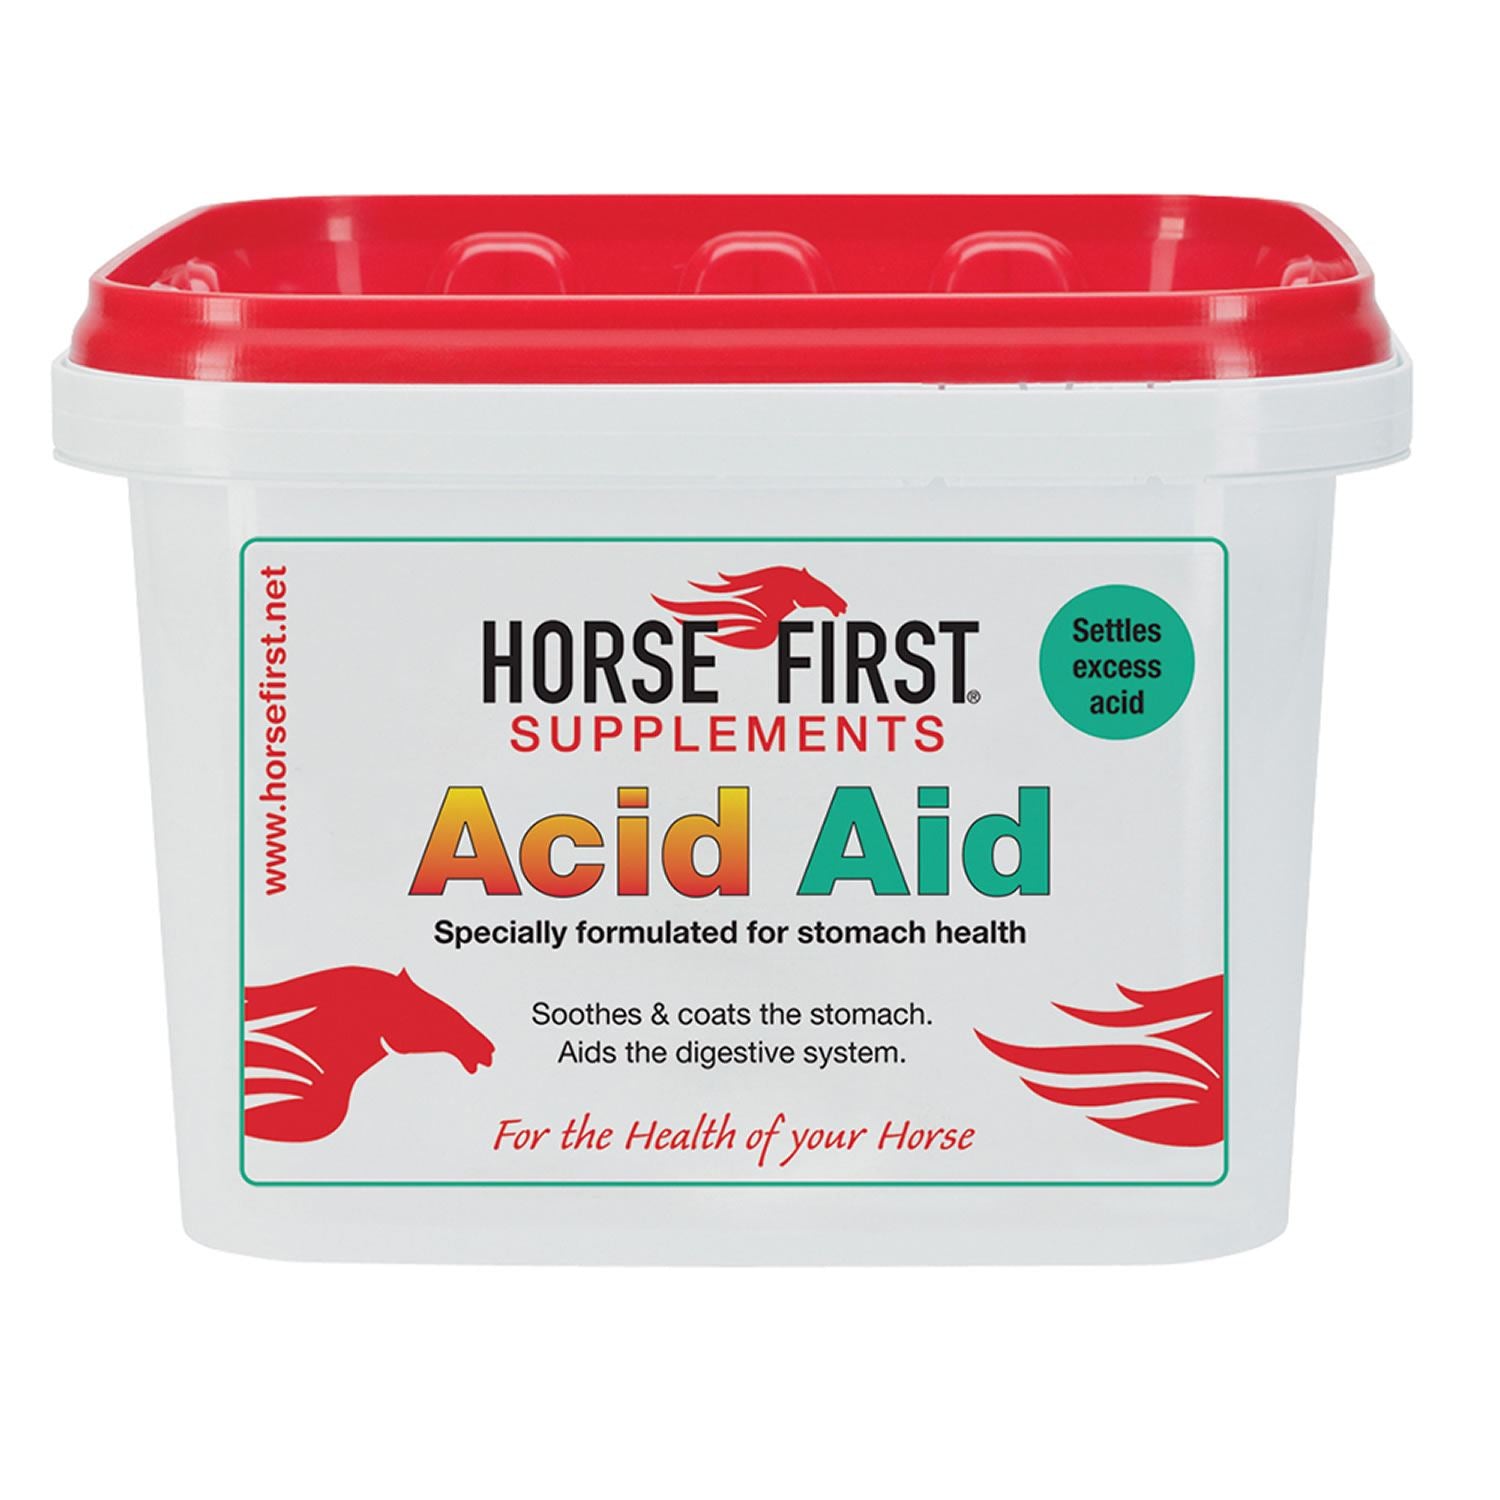 HORSE FIRST ACID AID, designed to soothe the gastric system and maintain a healthy digestive tract